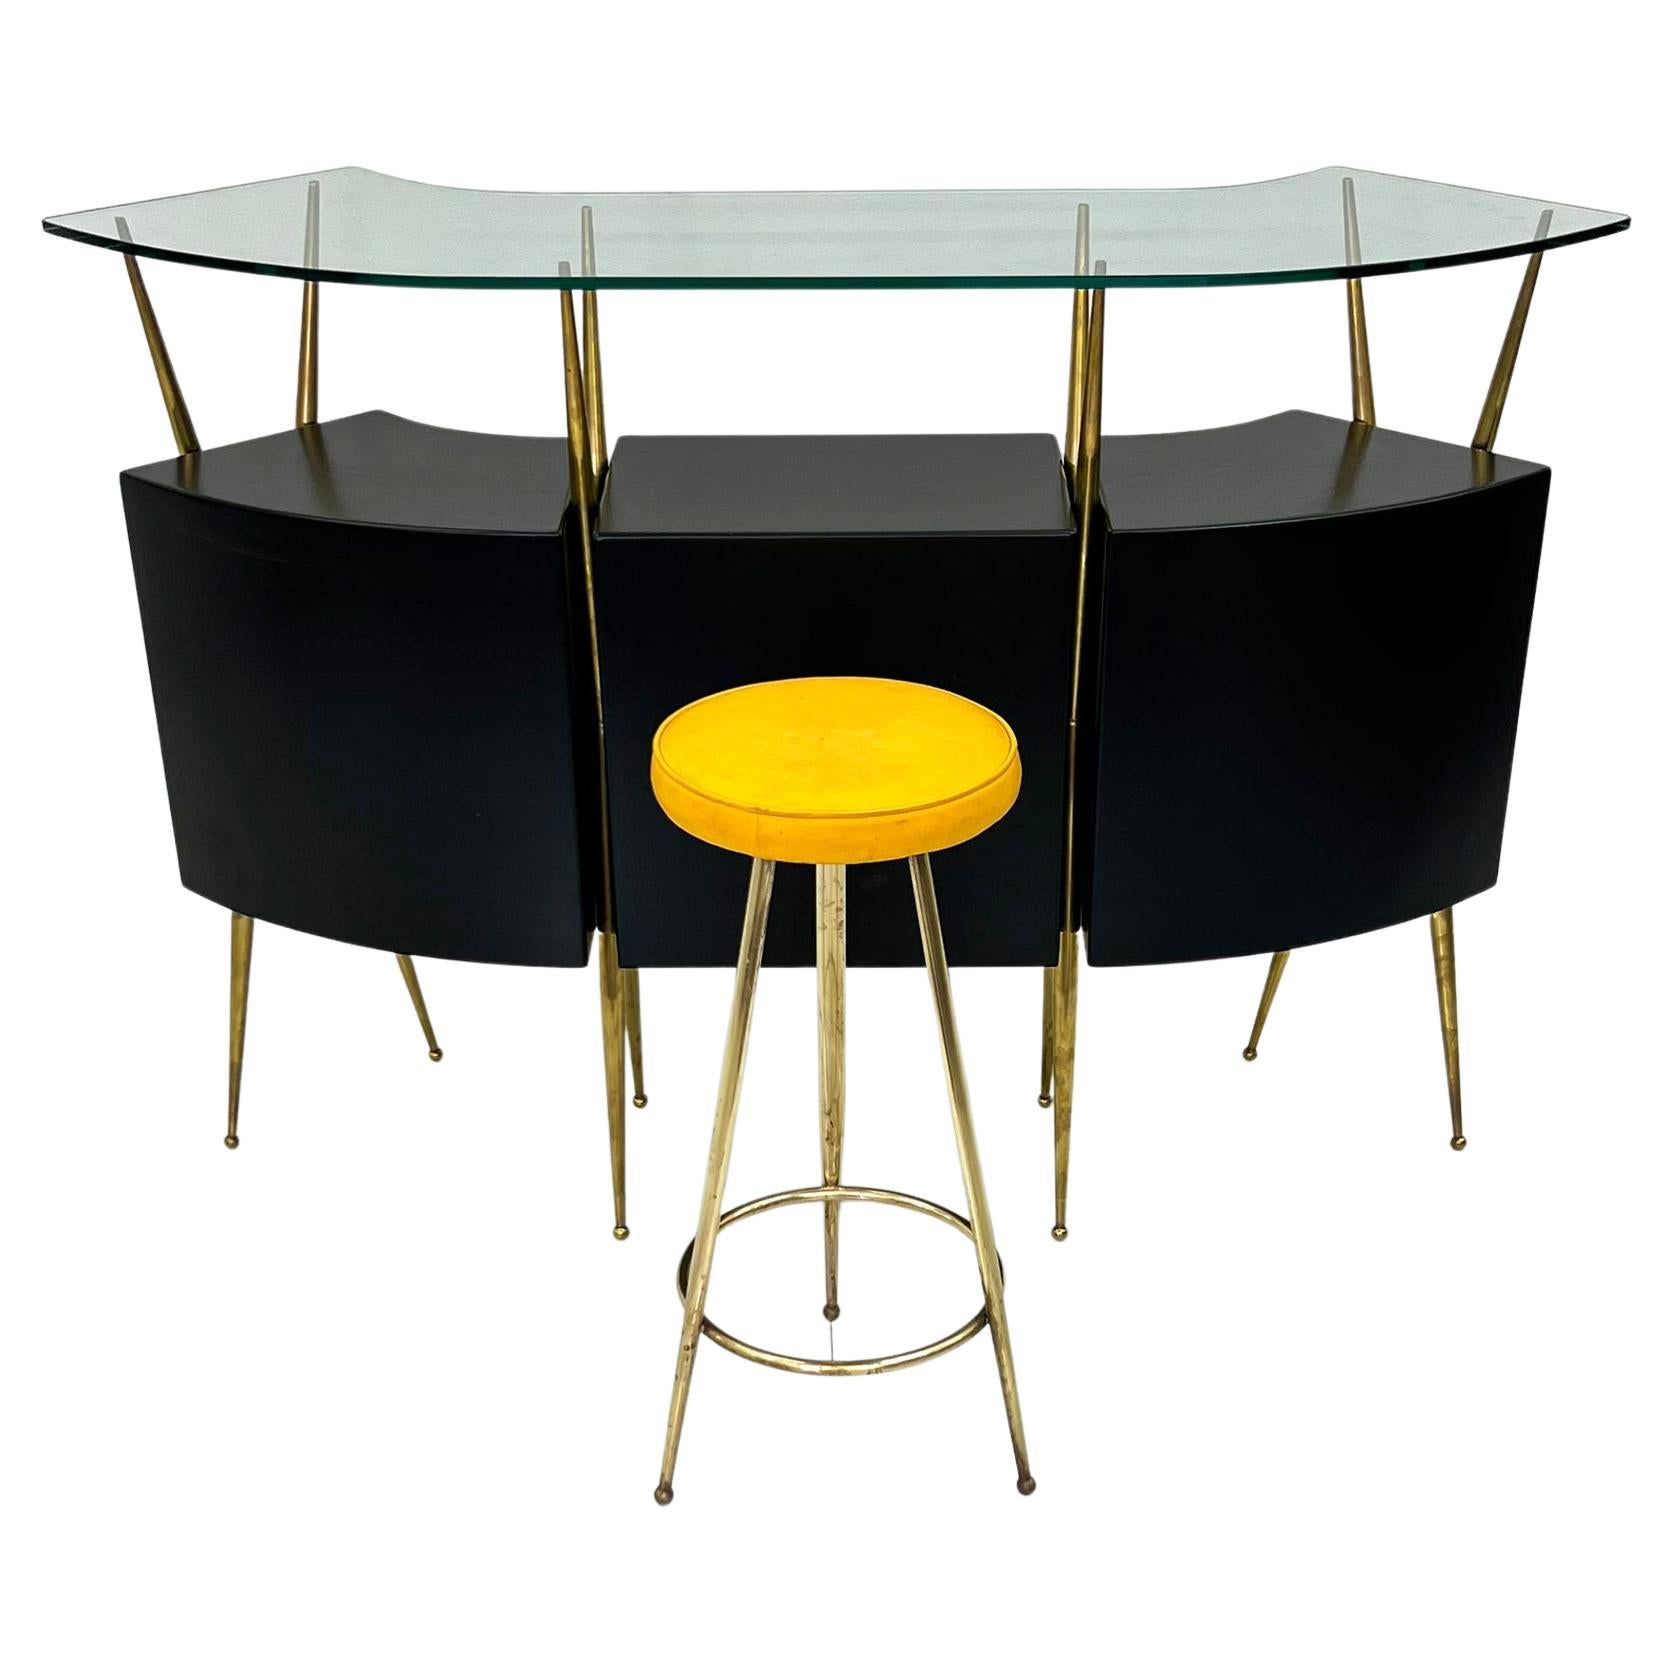 This bar unit is simply stunning-- from every single angle. often attributed to Gio Ponti, this bar features angular brass upright splayed legs, with atomic style ball feet. This bar is so clean, elegant and timeless, it could effortlessly flex into